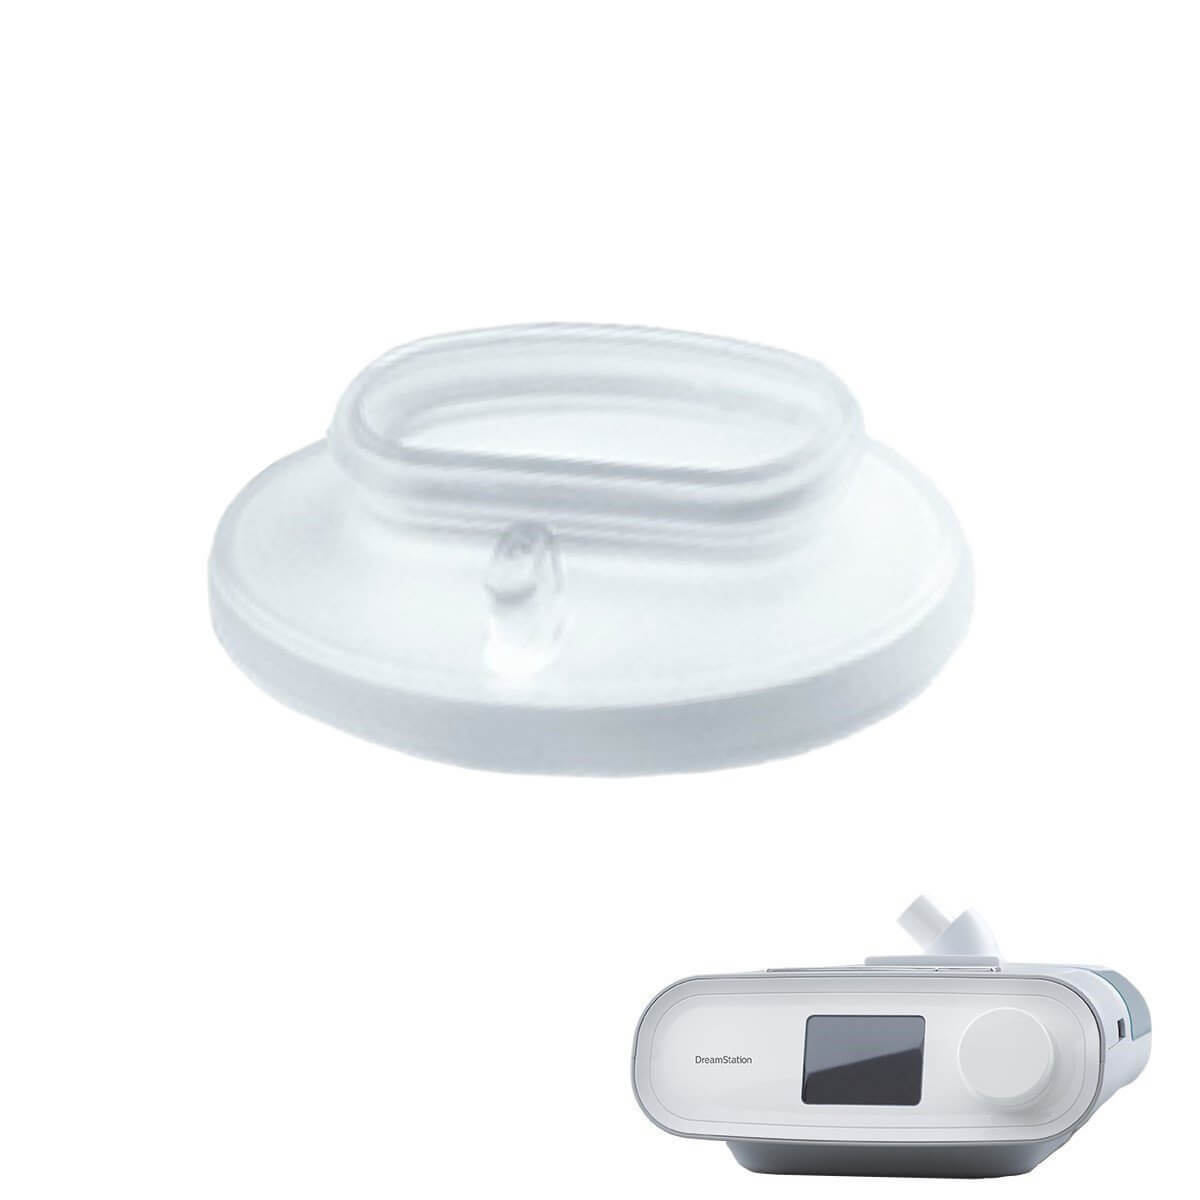 DreamStation Humidifier Dry Box Inlet Seal By Philips Respironics